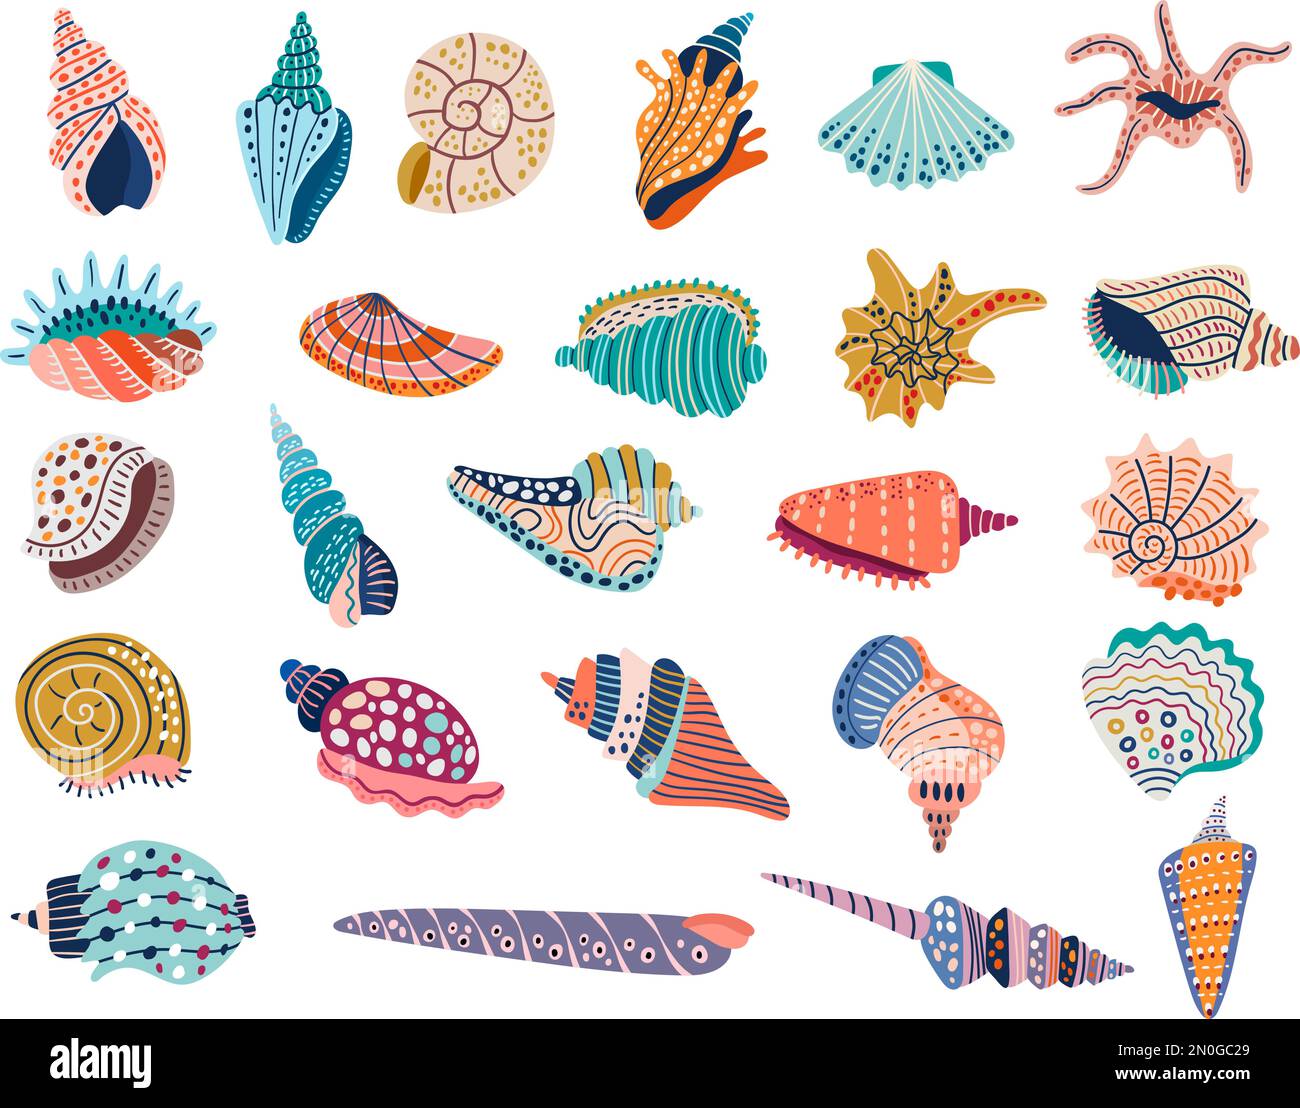 Doodle seashell. Colored stylized vector illustrations of marine seashells recent pictures set isolated Stock Vector